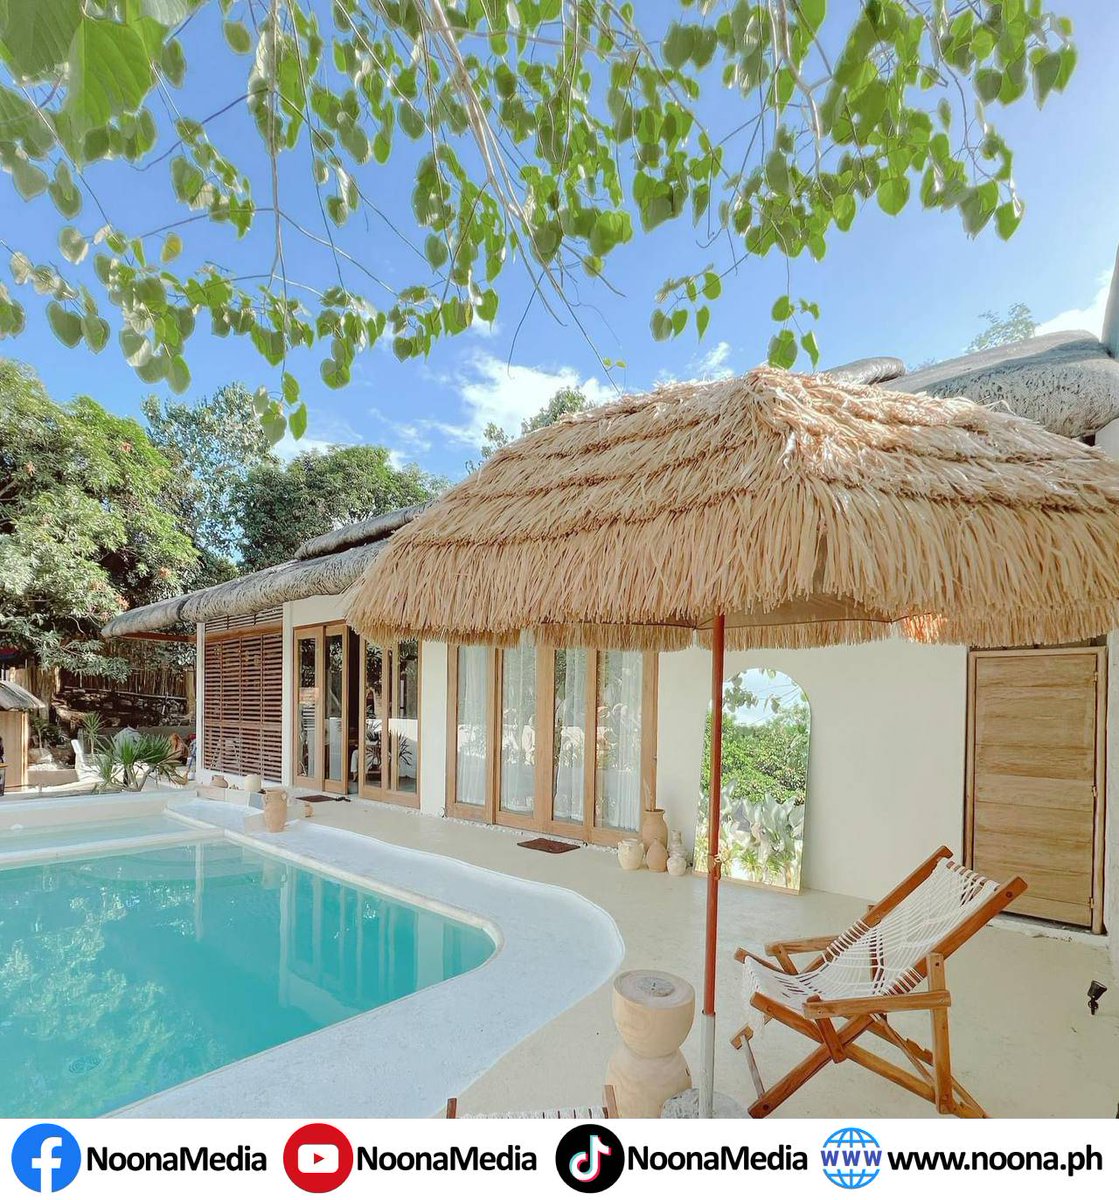 Noona Lifestyle | Home Vacation Rental

You may genuinely rest and forget the stresses of your daily routine in Lulan's relaxing ambiance, which resonates with relaxation.

𝐋𝐮𝐥𝐚𝐧

#noonalifestyle #noonaph #noonaphilippines #noonasports #Lulan